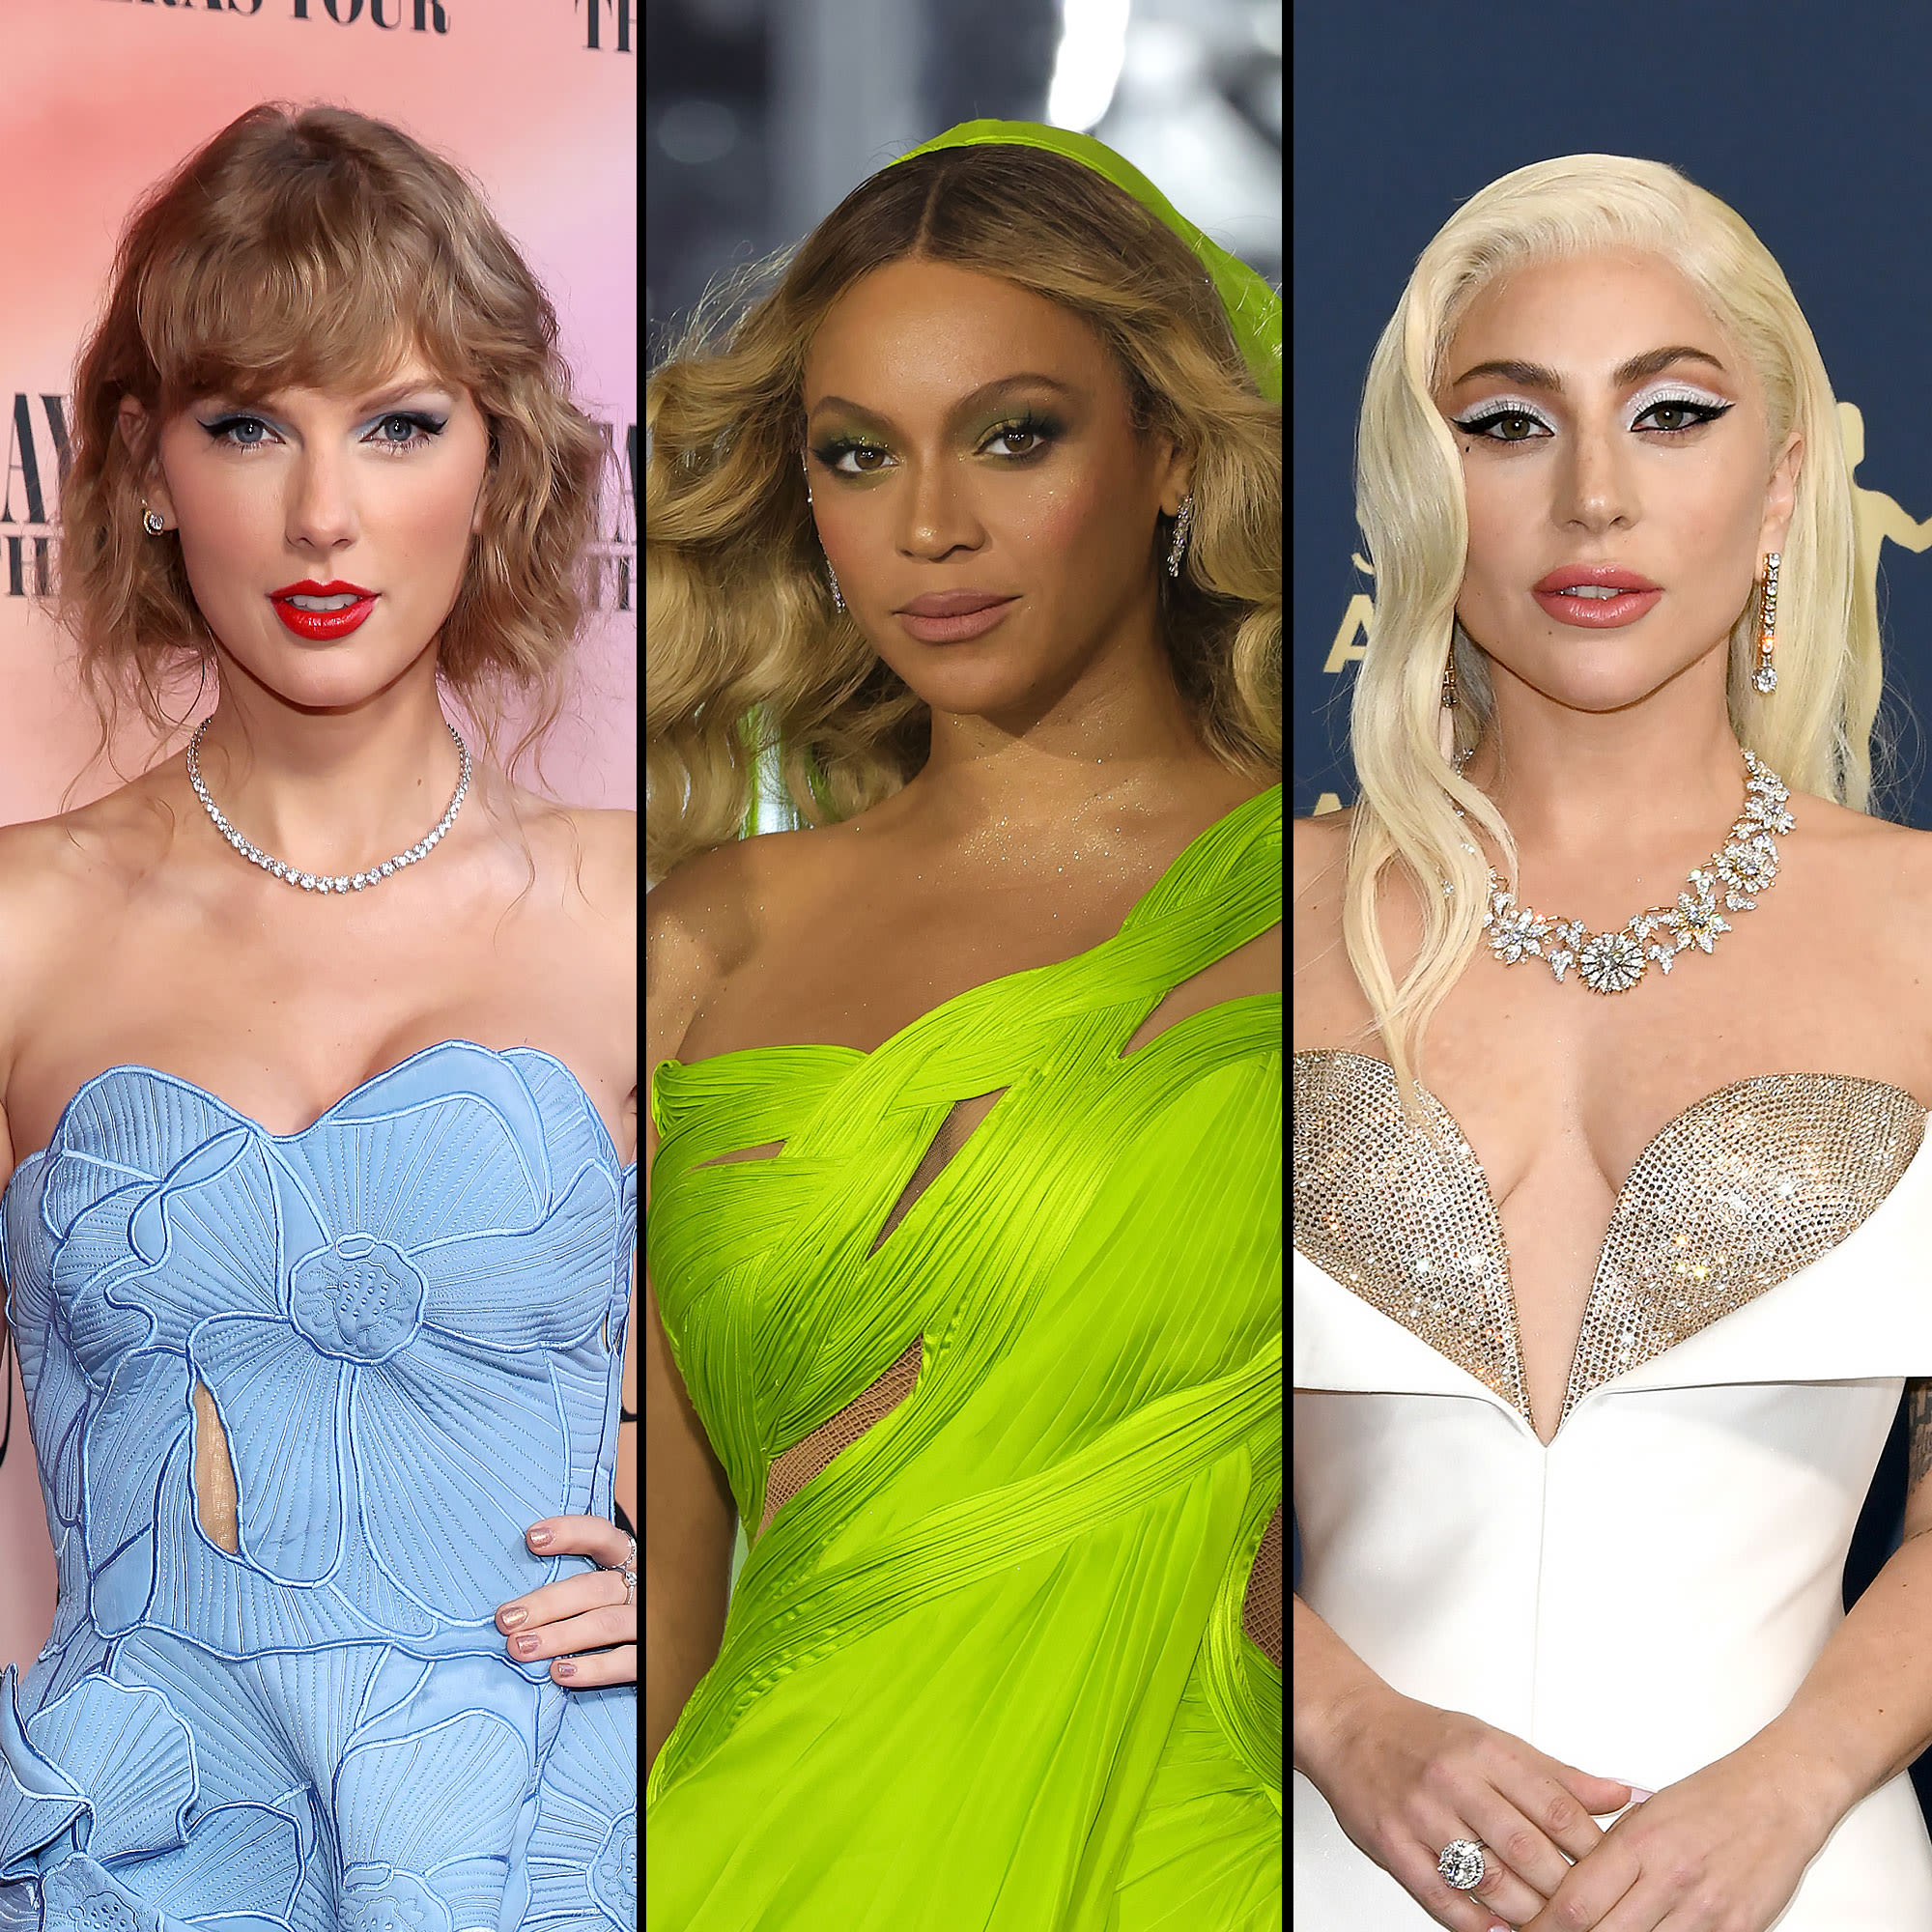 The Biggest Takeaways From Apple Music’s Top 100 Albums List: Taylor Swift, Beyonce, Gaga and More